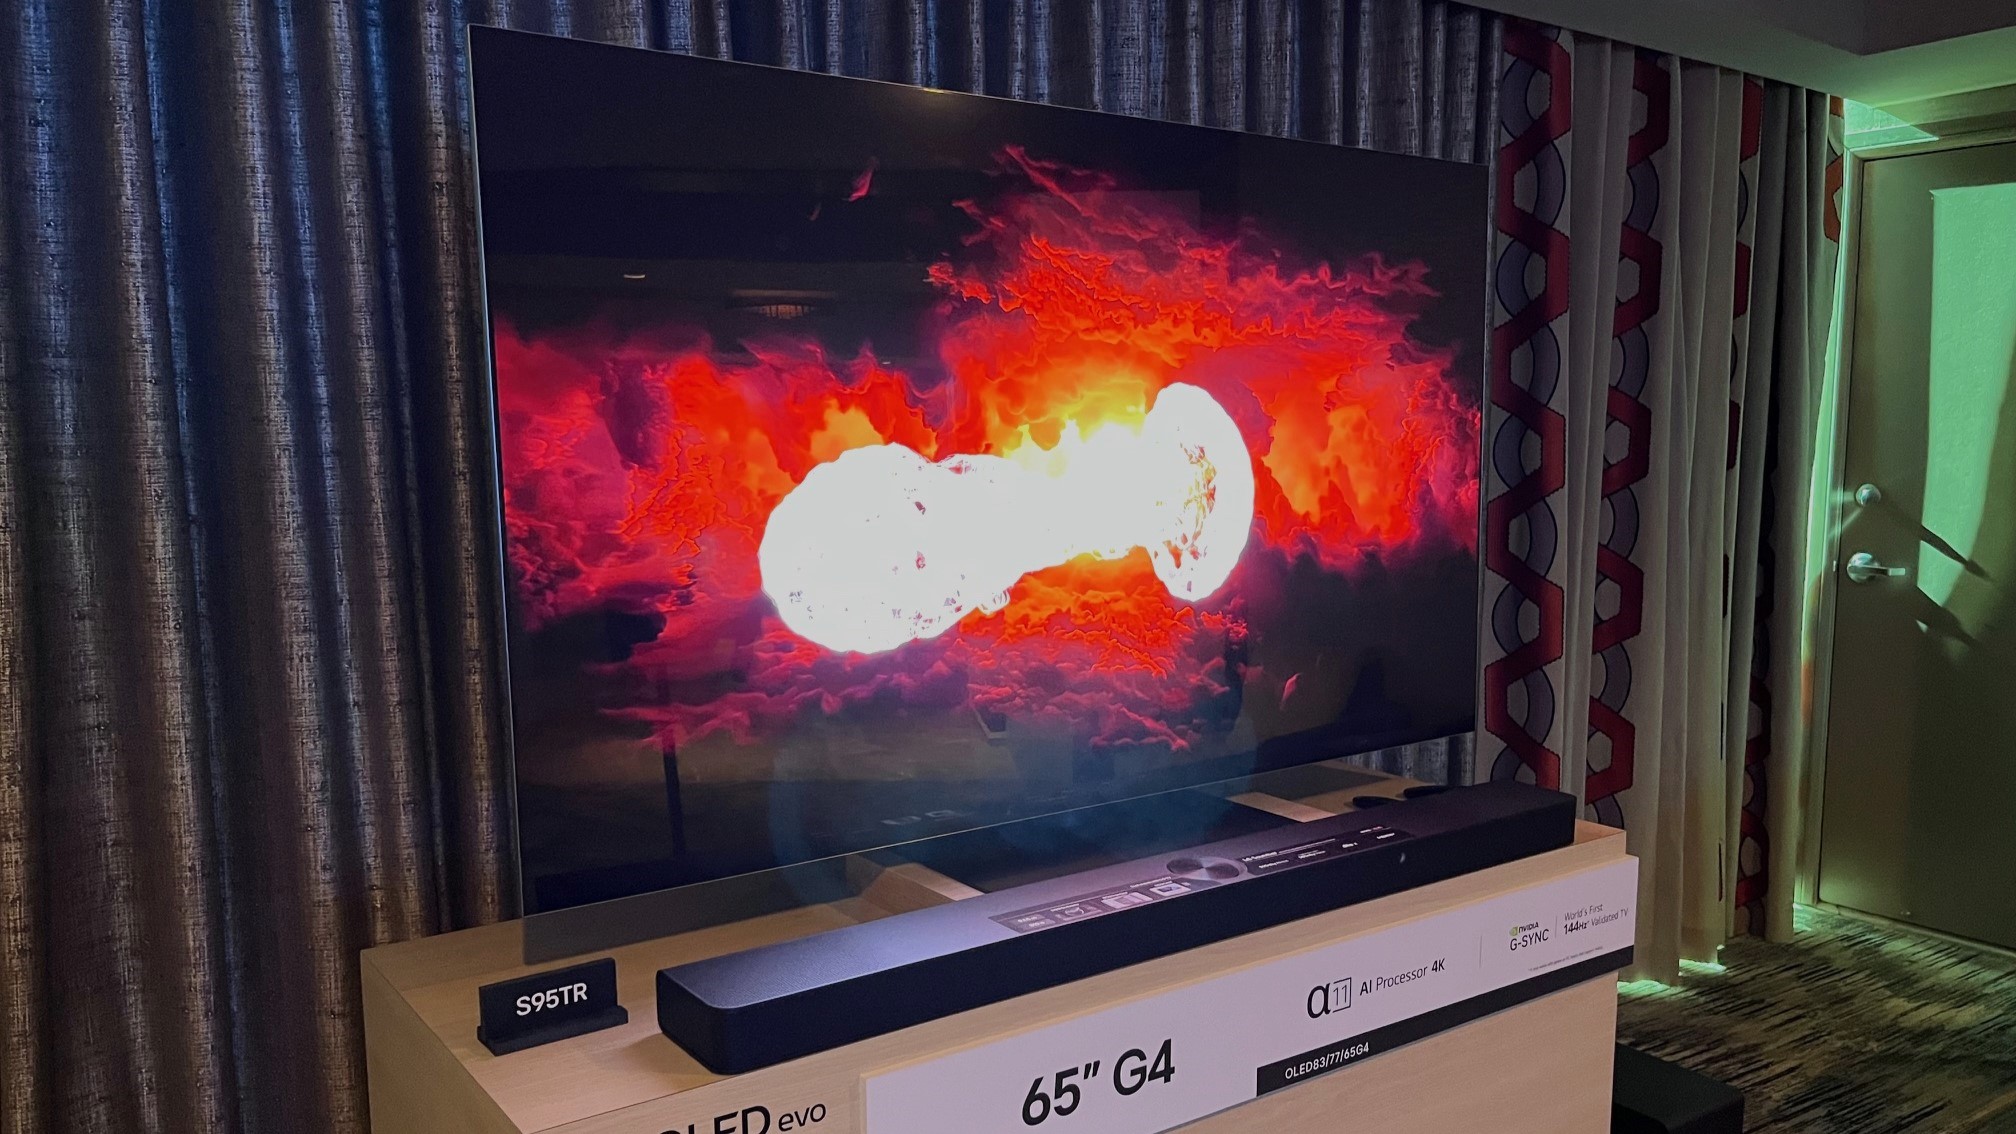 LG G4 OLED TV showing an abstract image